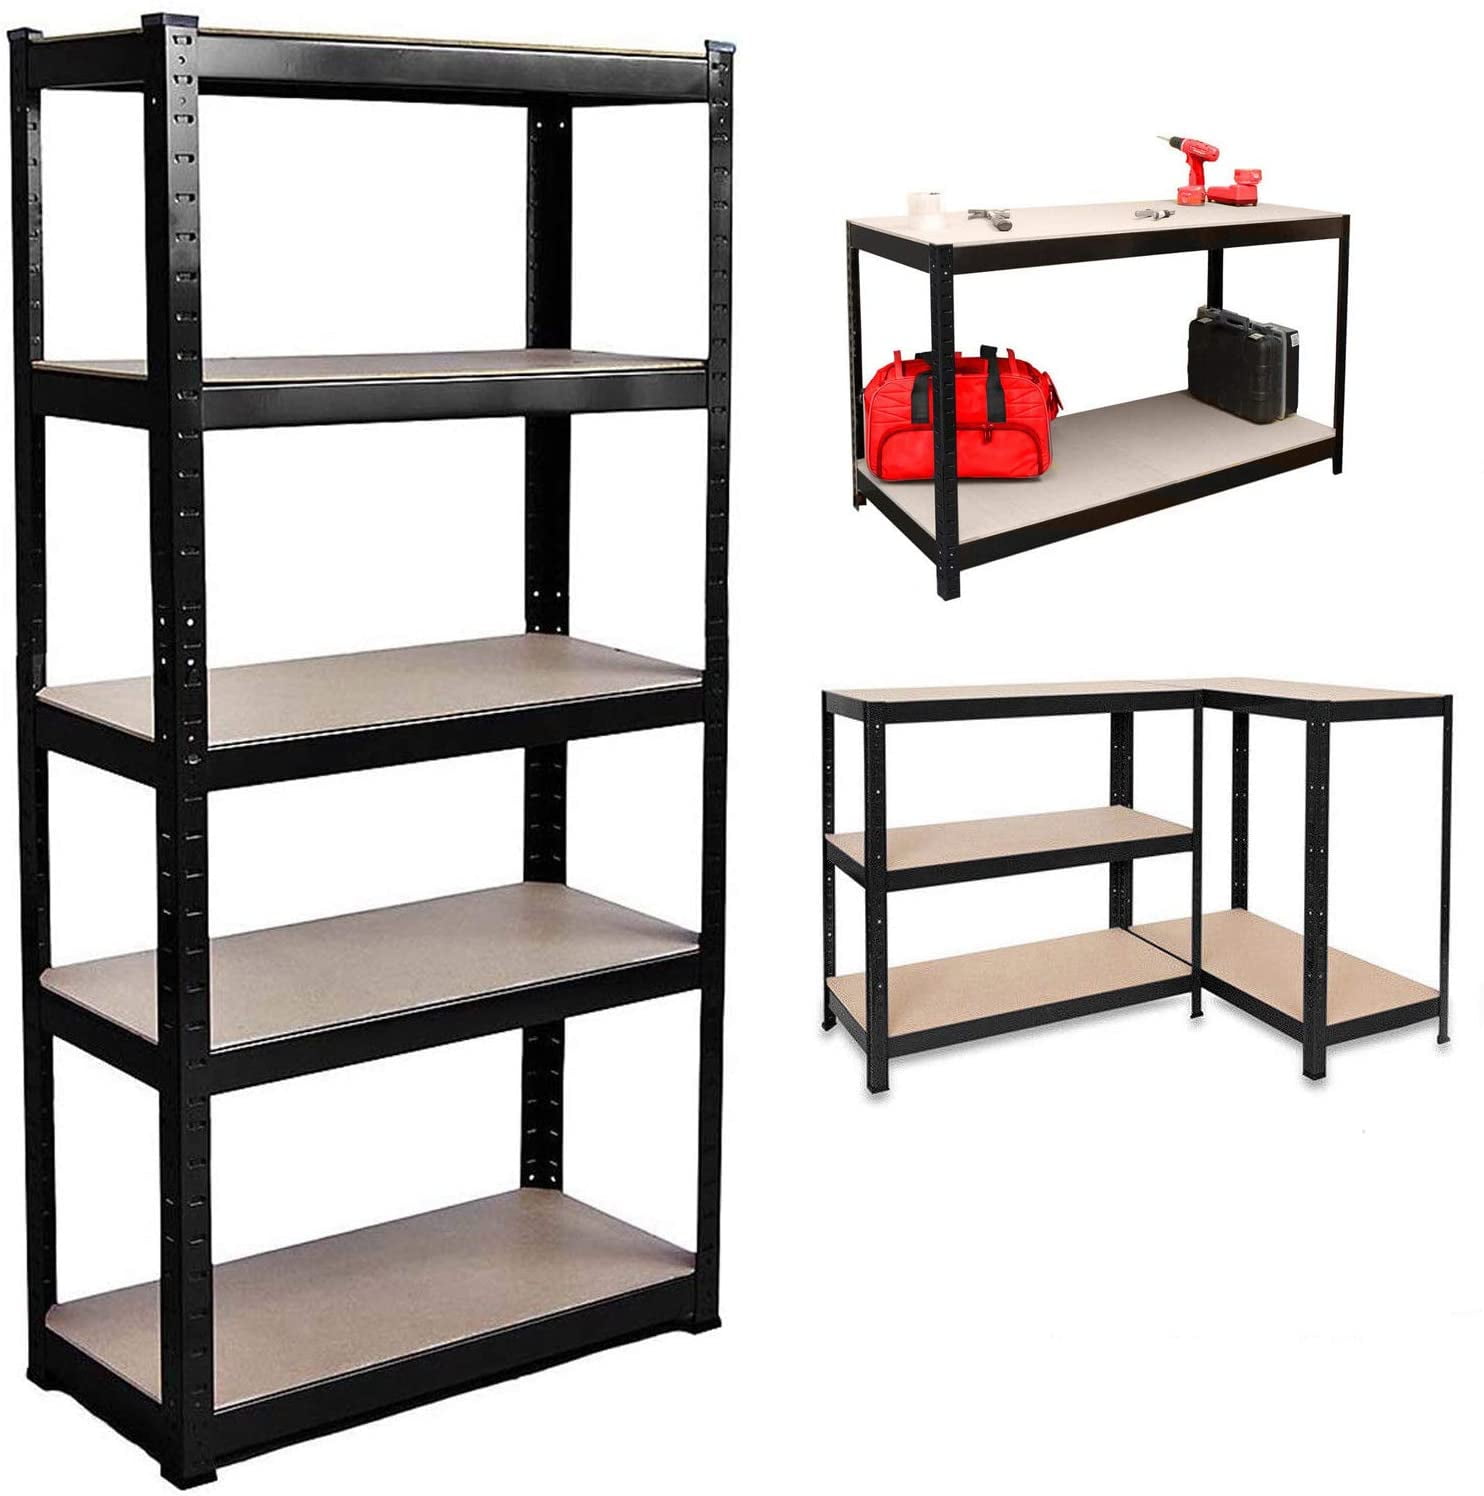 5 Tier Heavy Duty Steel Shelving Racking Warehouse Shed Garage 875KG Capacity Storage Multi-Function Shelving Unit Boltless Compact Easy Assembling Shelves,180x90x40cm,Red 